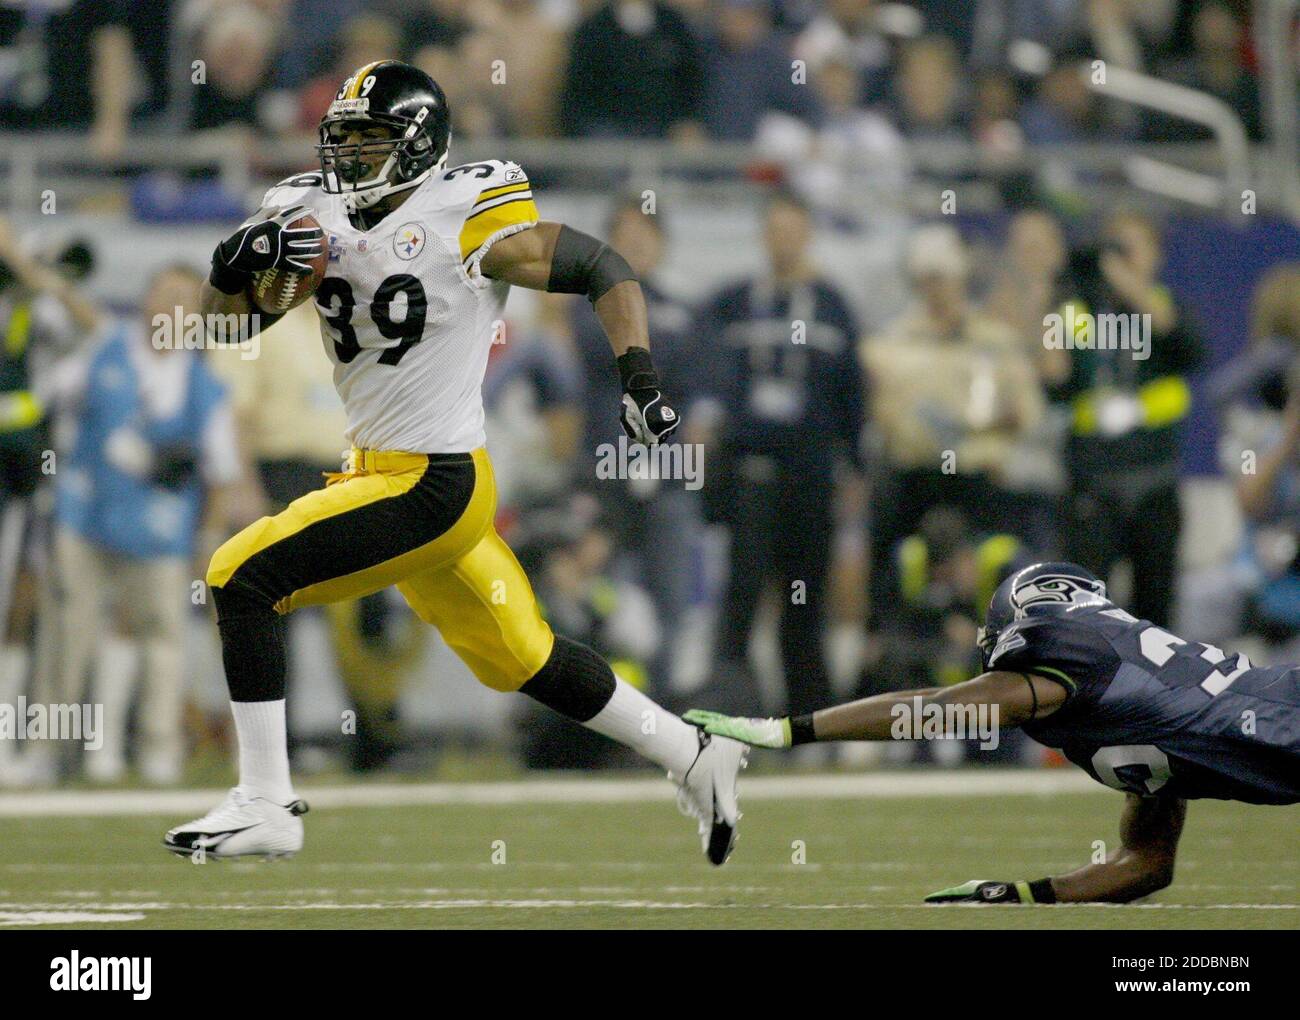 NO FILM, NO VIDEO, NO TV, NO DOCUMENTARY - Pittsburgh Steelers' Willie Parker eludes a Seattle Seahawks defender on his way to a touchdown in the third quarter during the Steelers 21-10 win over the Seahawks at Super Bowl XL in Detroit, Michigan, USA, on February 5, 2006. Photo by David Gilkey/Detroit Free Press/KRT/Cameleon/ABACAPRESS.COM Stock Photo